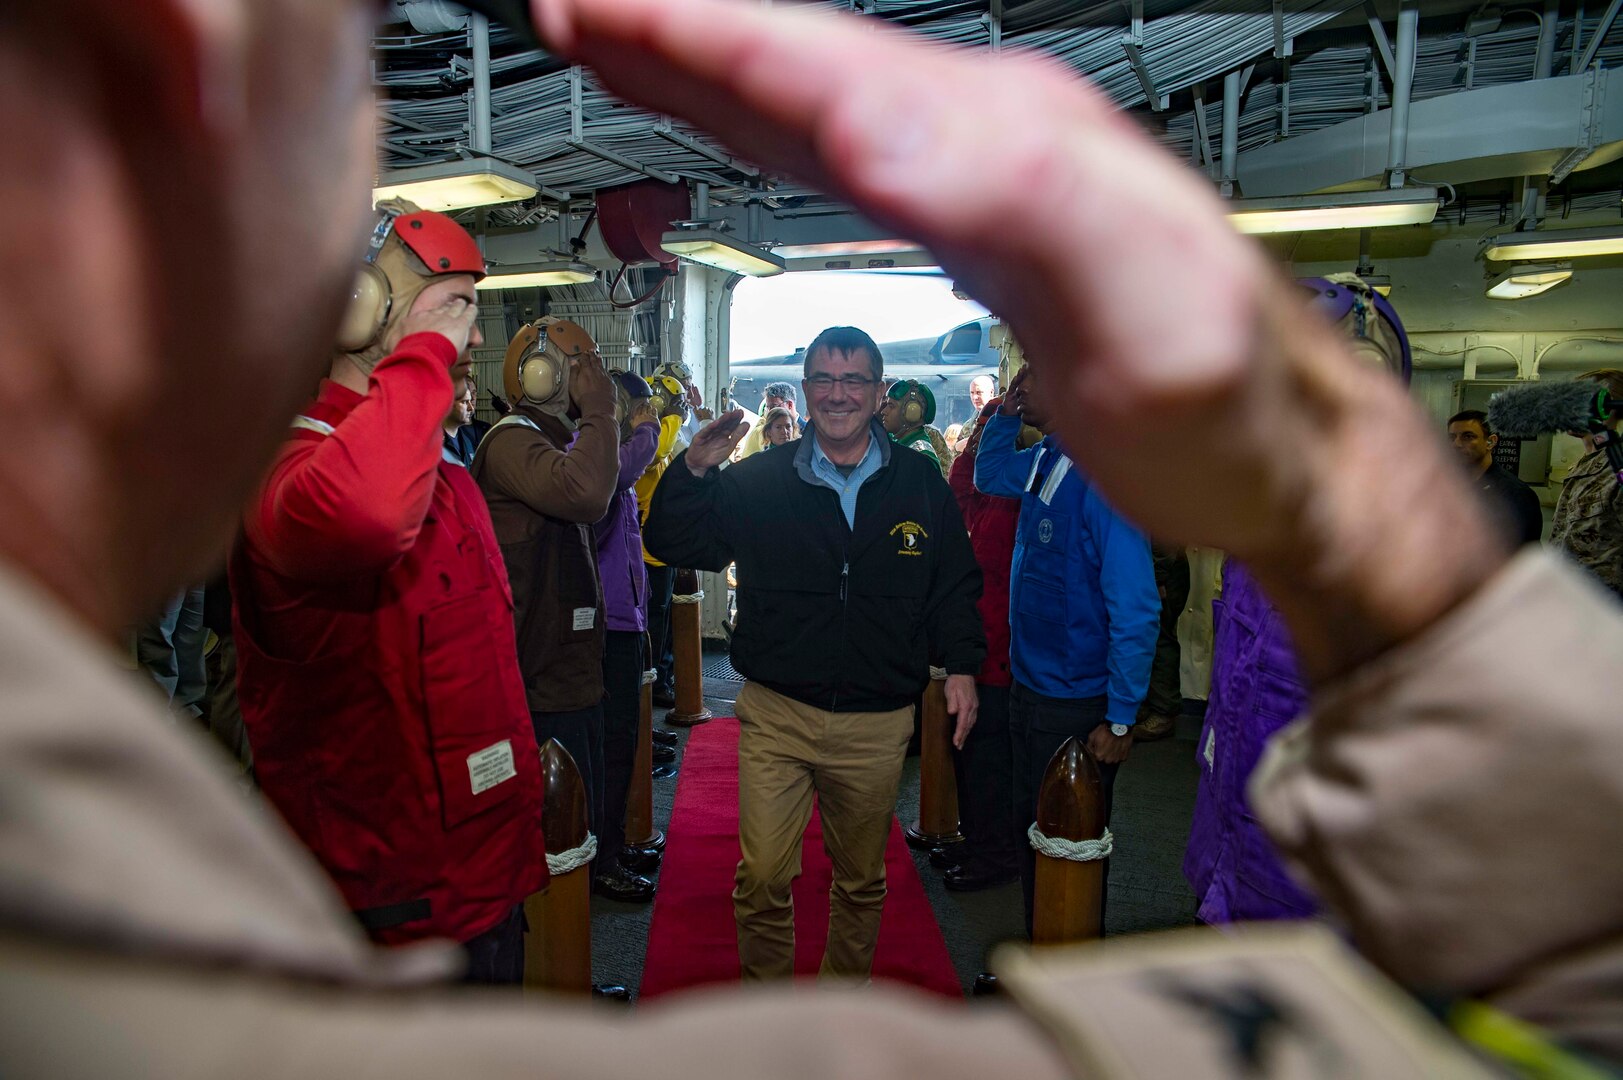 U.S. Defense Secretary Ash Carter arrives aboard the amphibious assault ship USS Kearsarge in the Arabian Gulf, Dec. 19, 2015. Carter has been on a weeklong middle east trip. The Kearsarge is the flagship for the Kearsarge Amphibious Ready Group and, with the embarked 26th Marine Expeditionary Unit, is deployed in support of maritime security operations and theater security cooperation efforts in the U.S. 5th Fleet area of operations. U.S. Navy photo by Petty Officer 3rd Class Tyler Preston